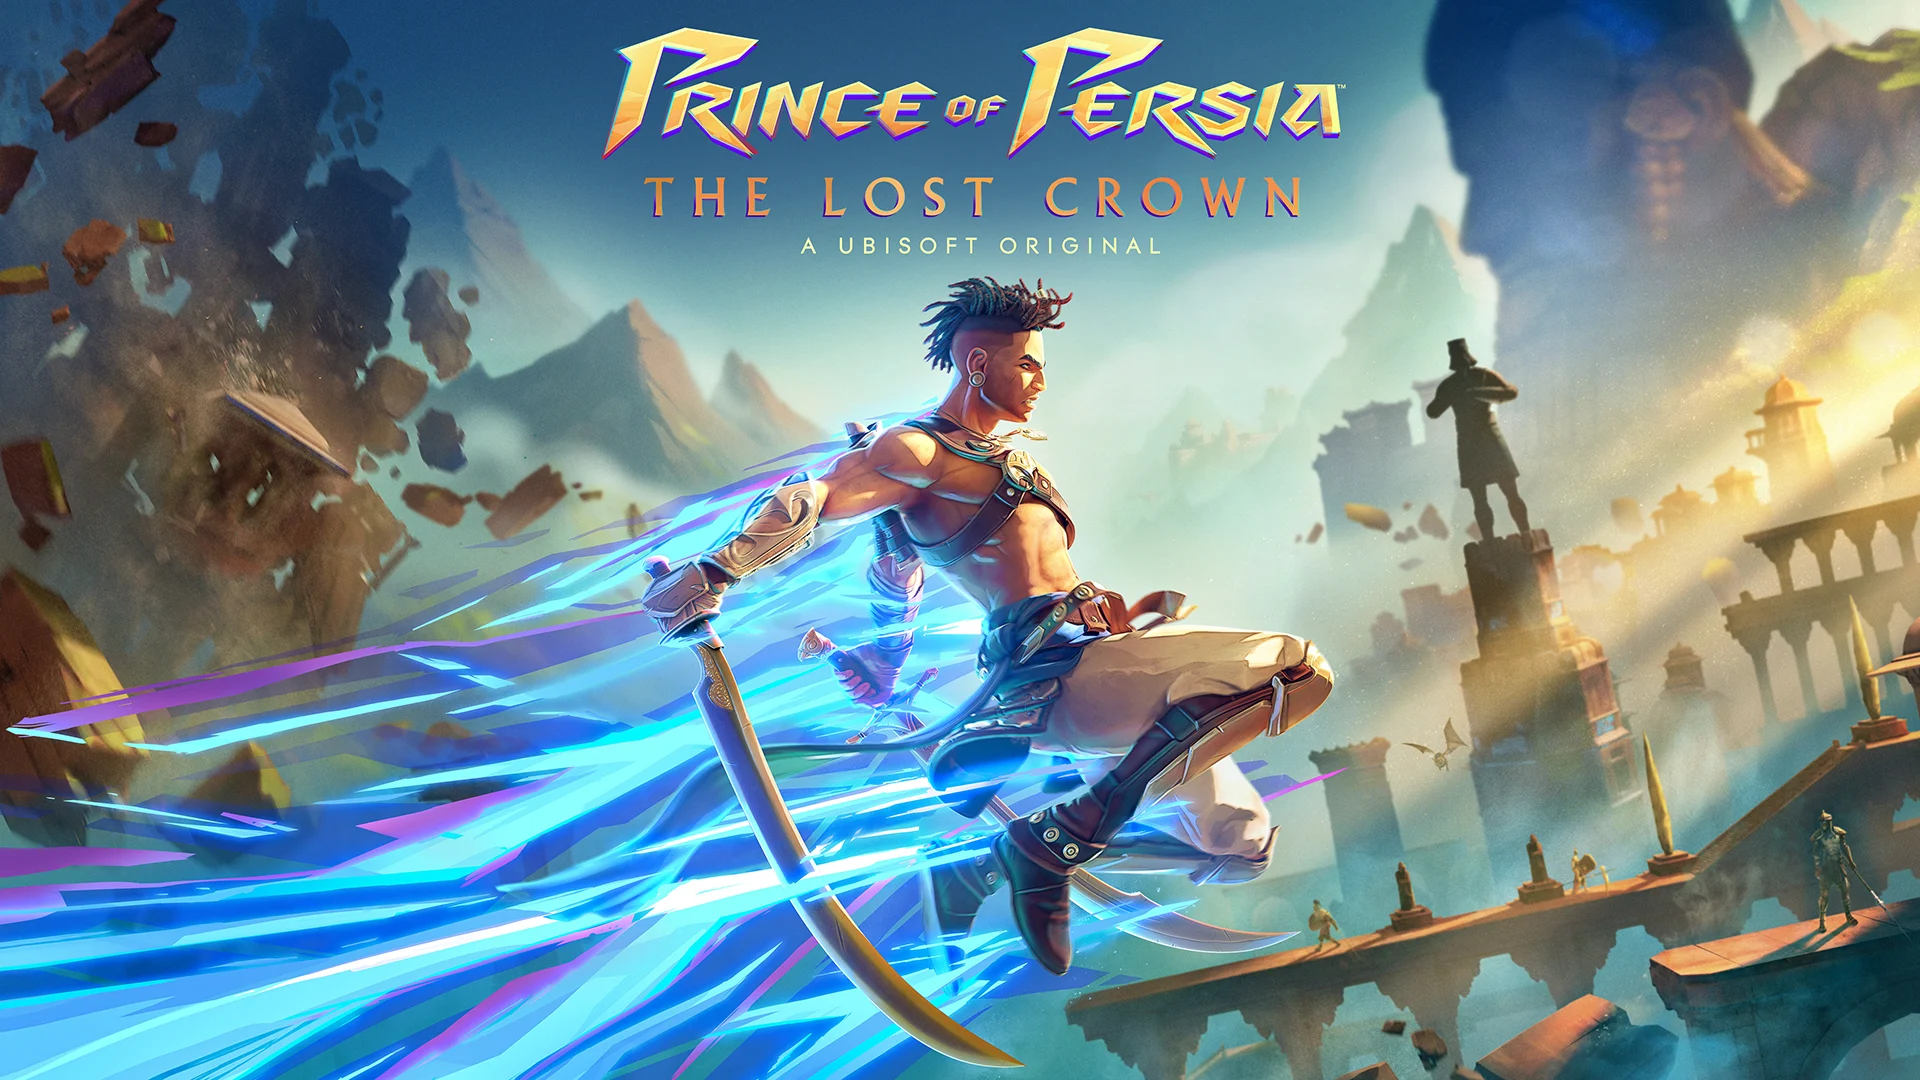 Embark On The New Chapter Of The Legendary Saga In Prince Of Persia: The Lost Crown – Available Now